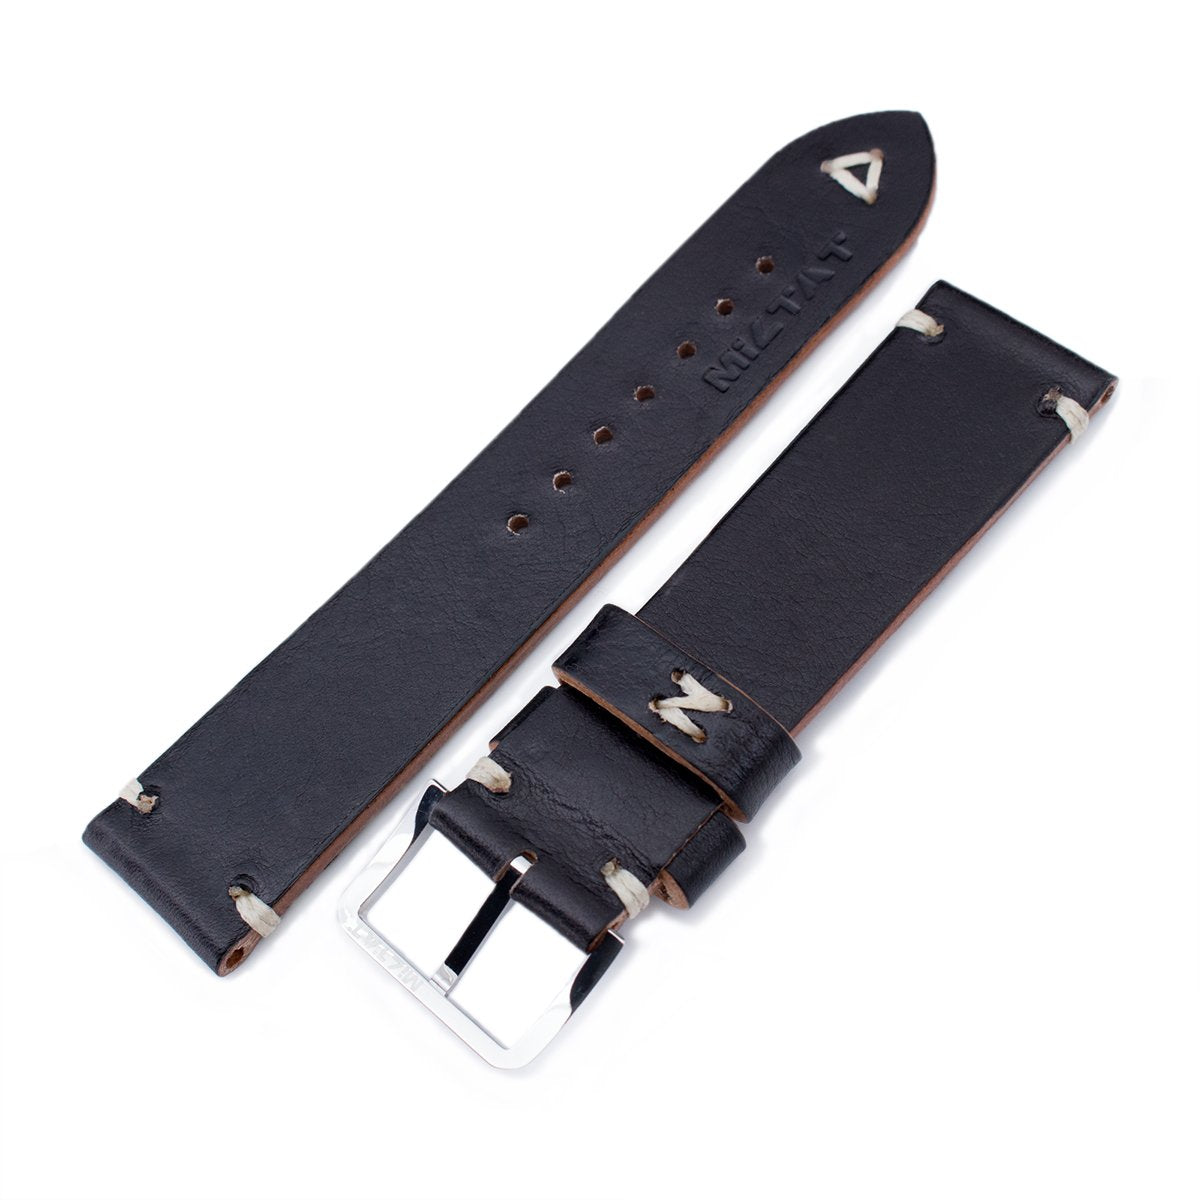 20mm 21mm 22mm MiLTAT Black Genuine Calf Leather Watch Strap Beige Stitching Polished Buckle Strapcode Watch Bands